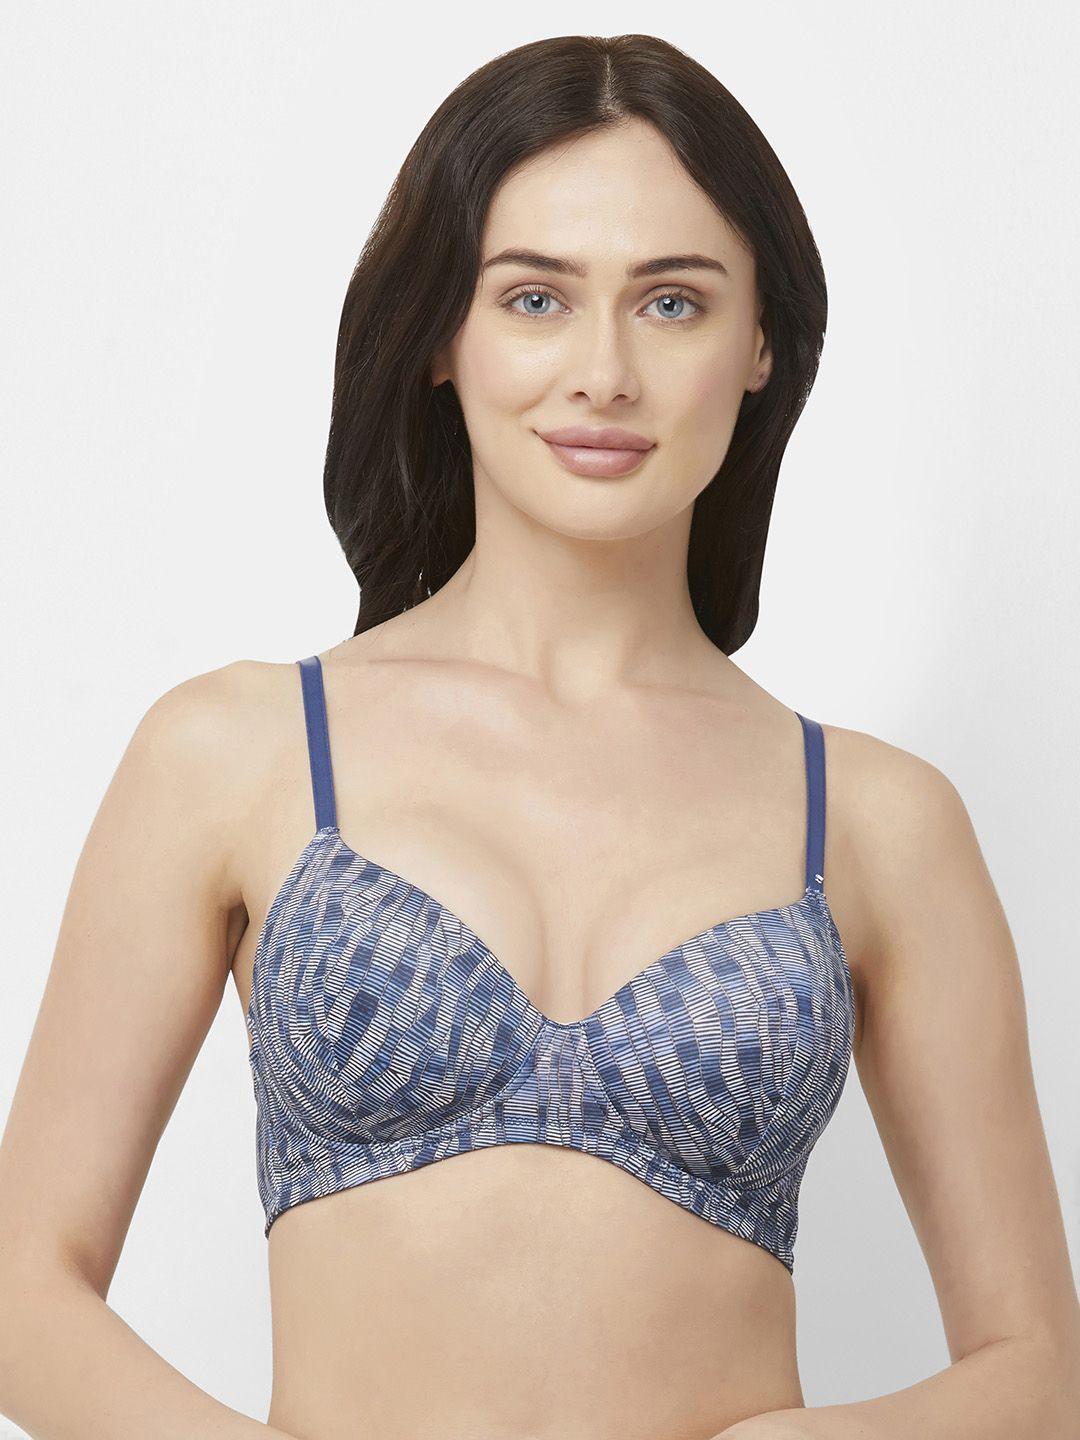 soie-blue-printed-non-wired-lightly-padded-semi-covered-t-shirt-bra-cb-117pr-3